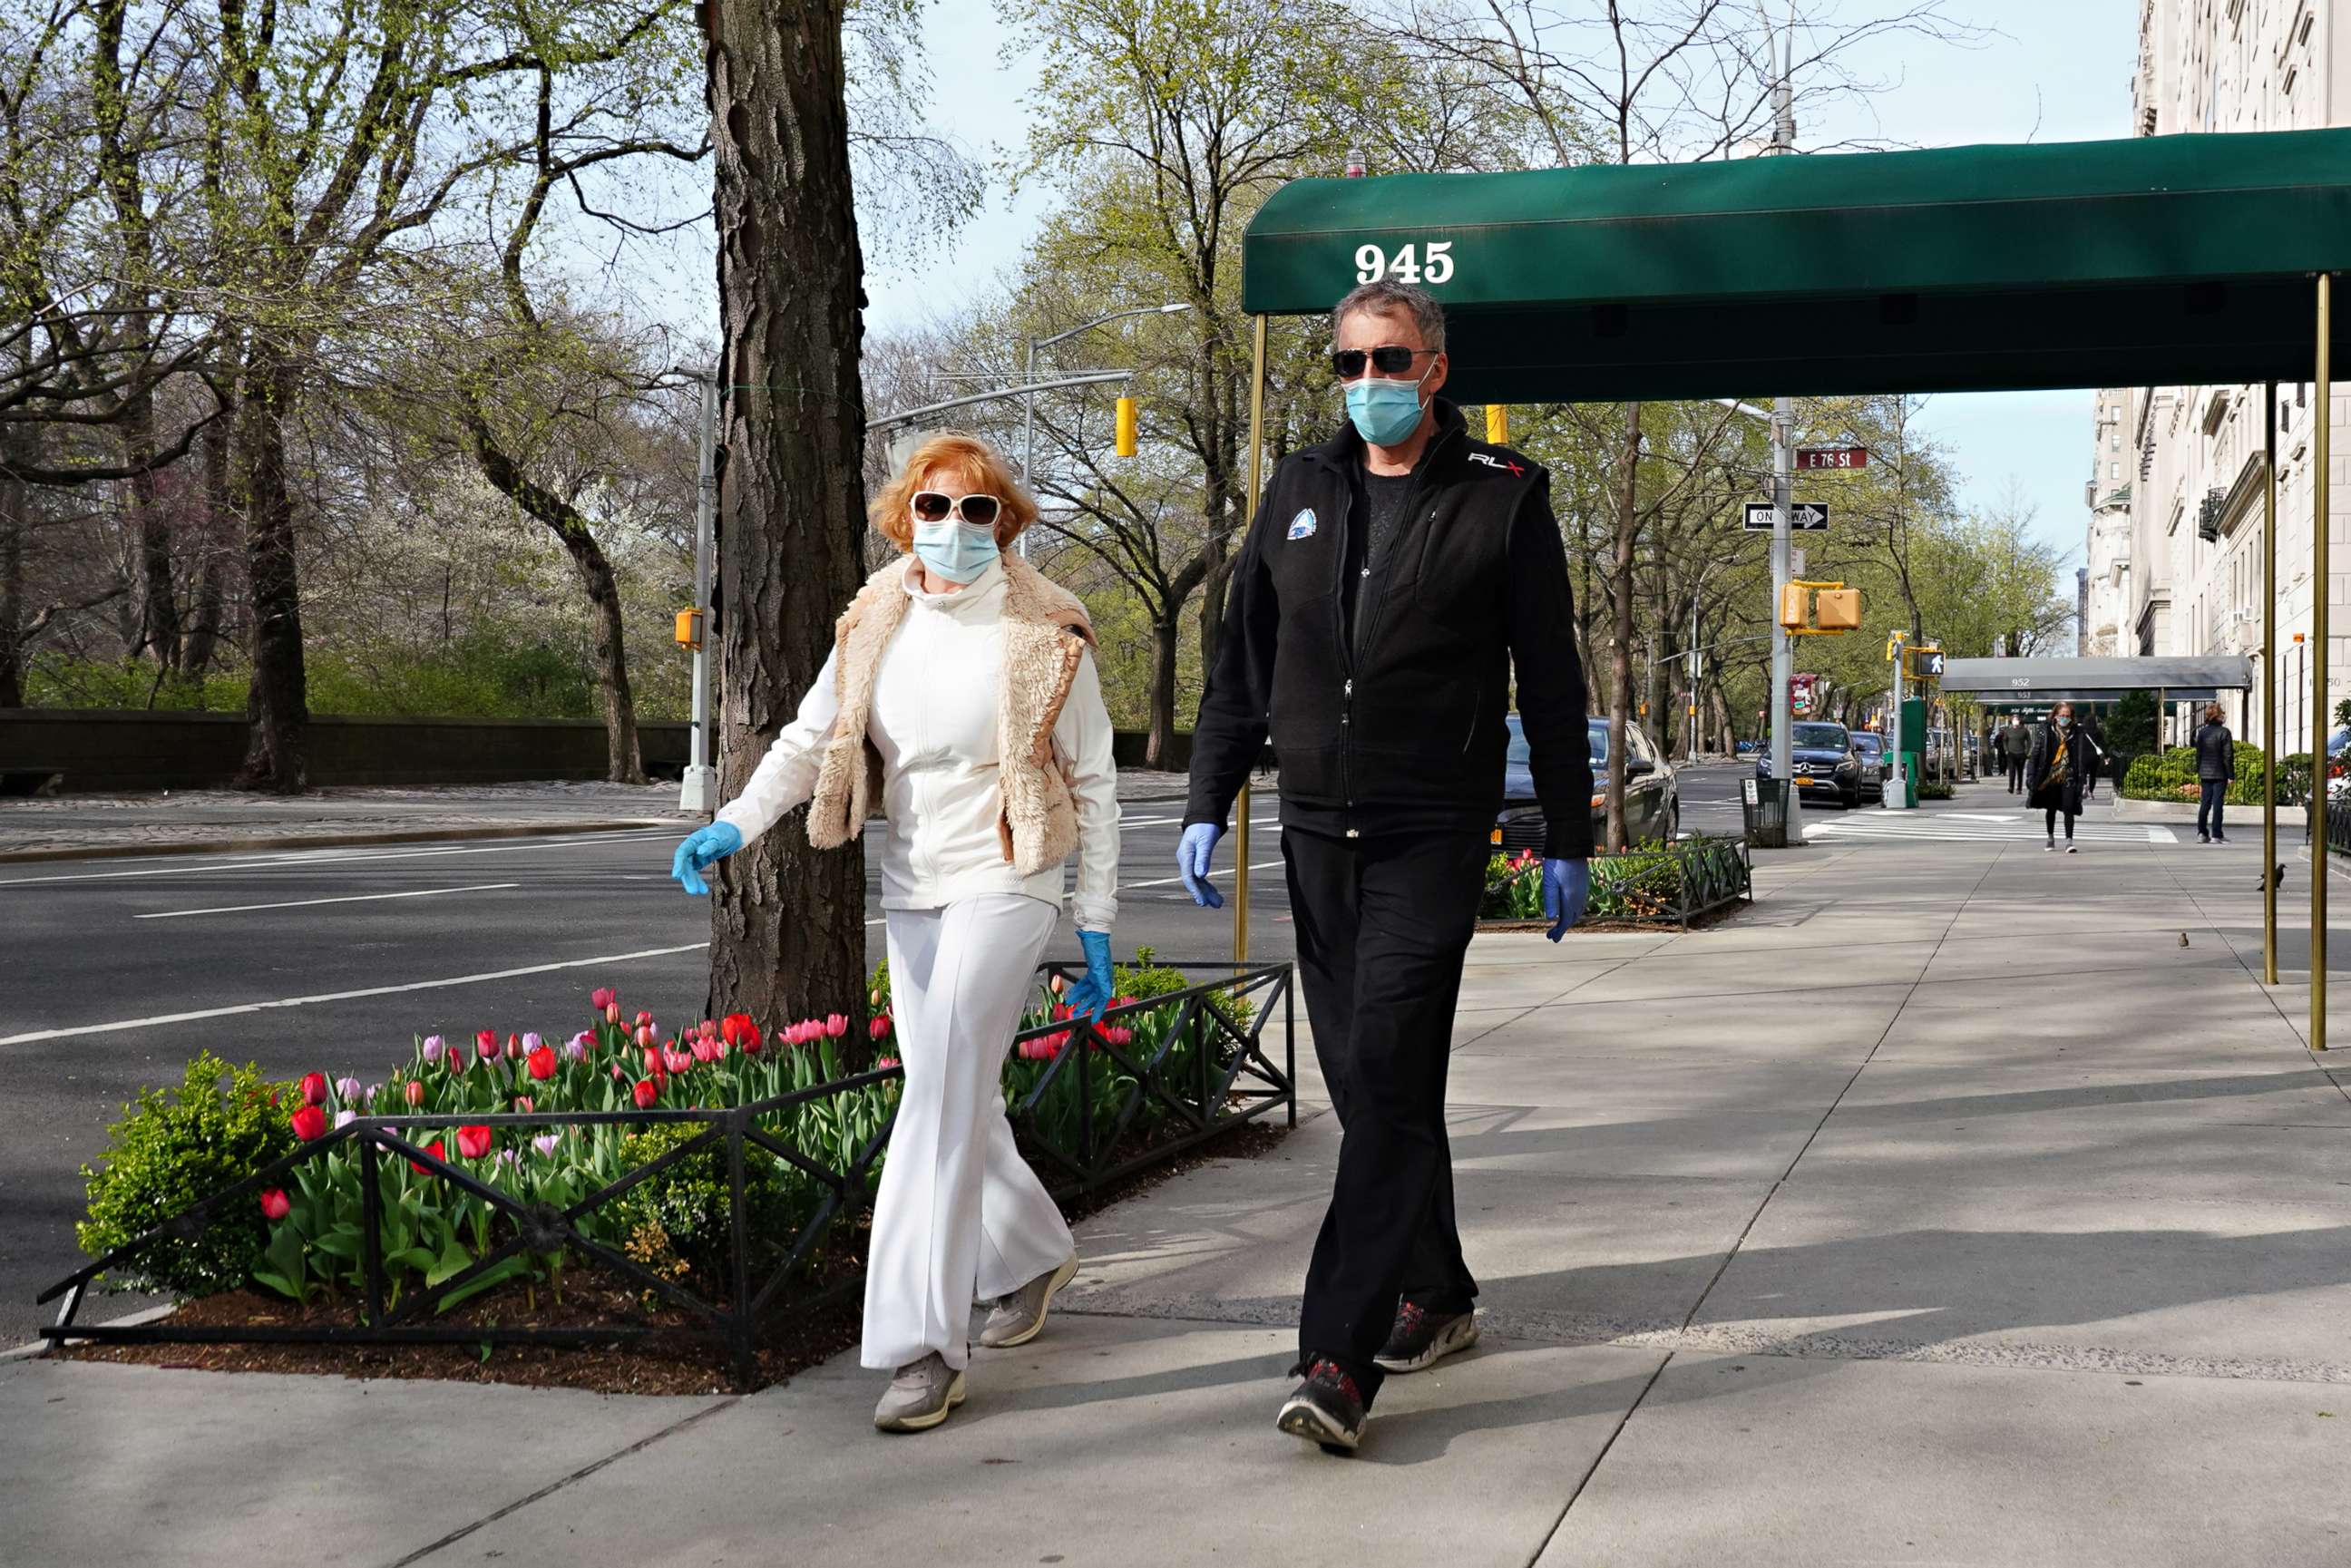 PHOTO: Two people walk on Fifth Avenue wearing protective masks during the coronavirus pandemic, April 12, 2020, in New York.